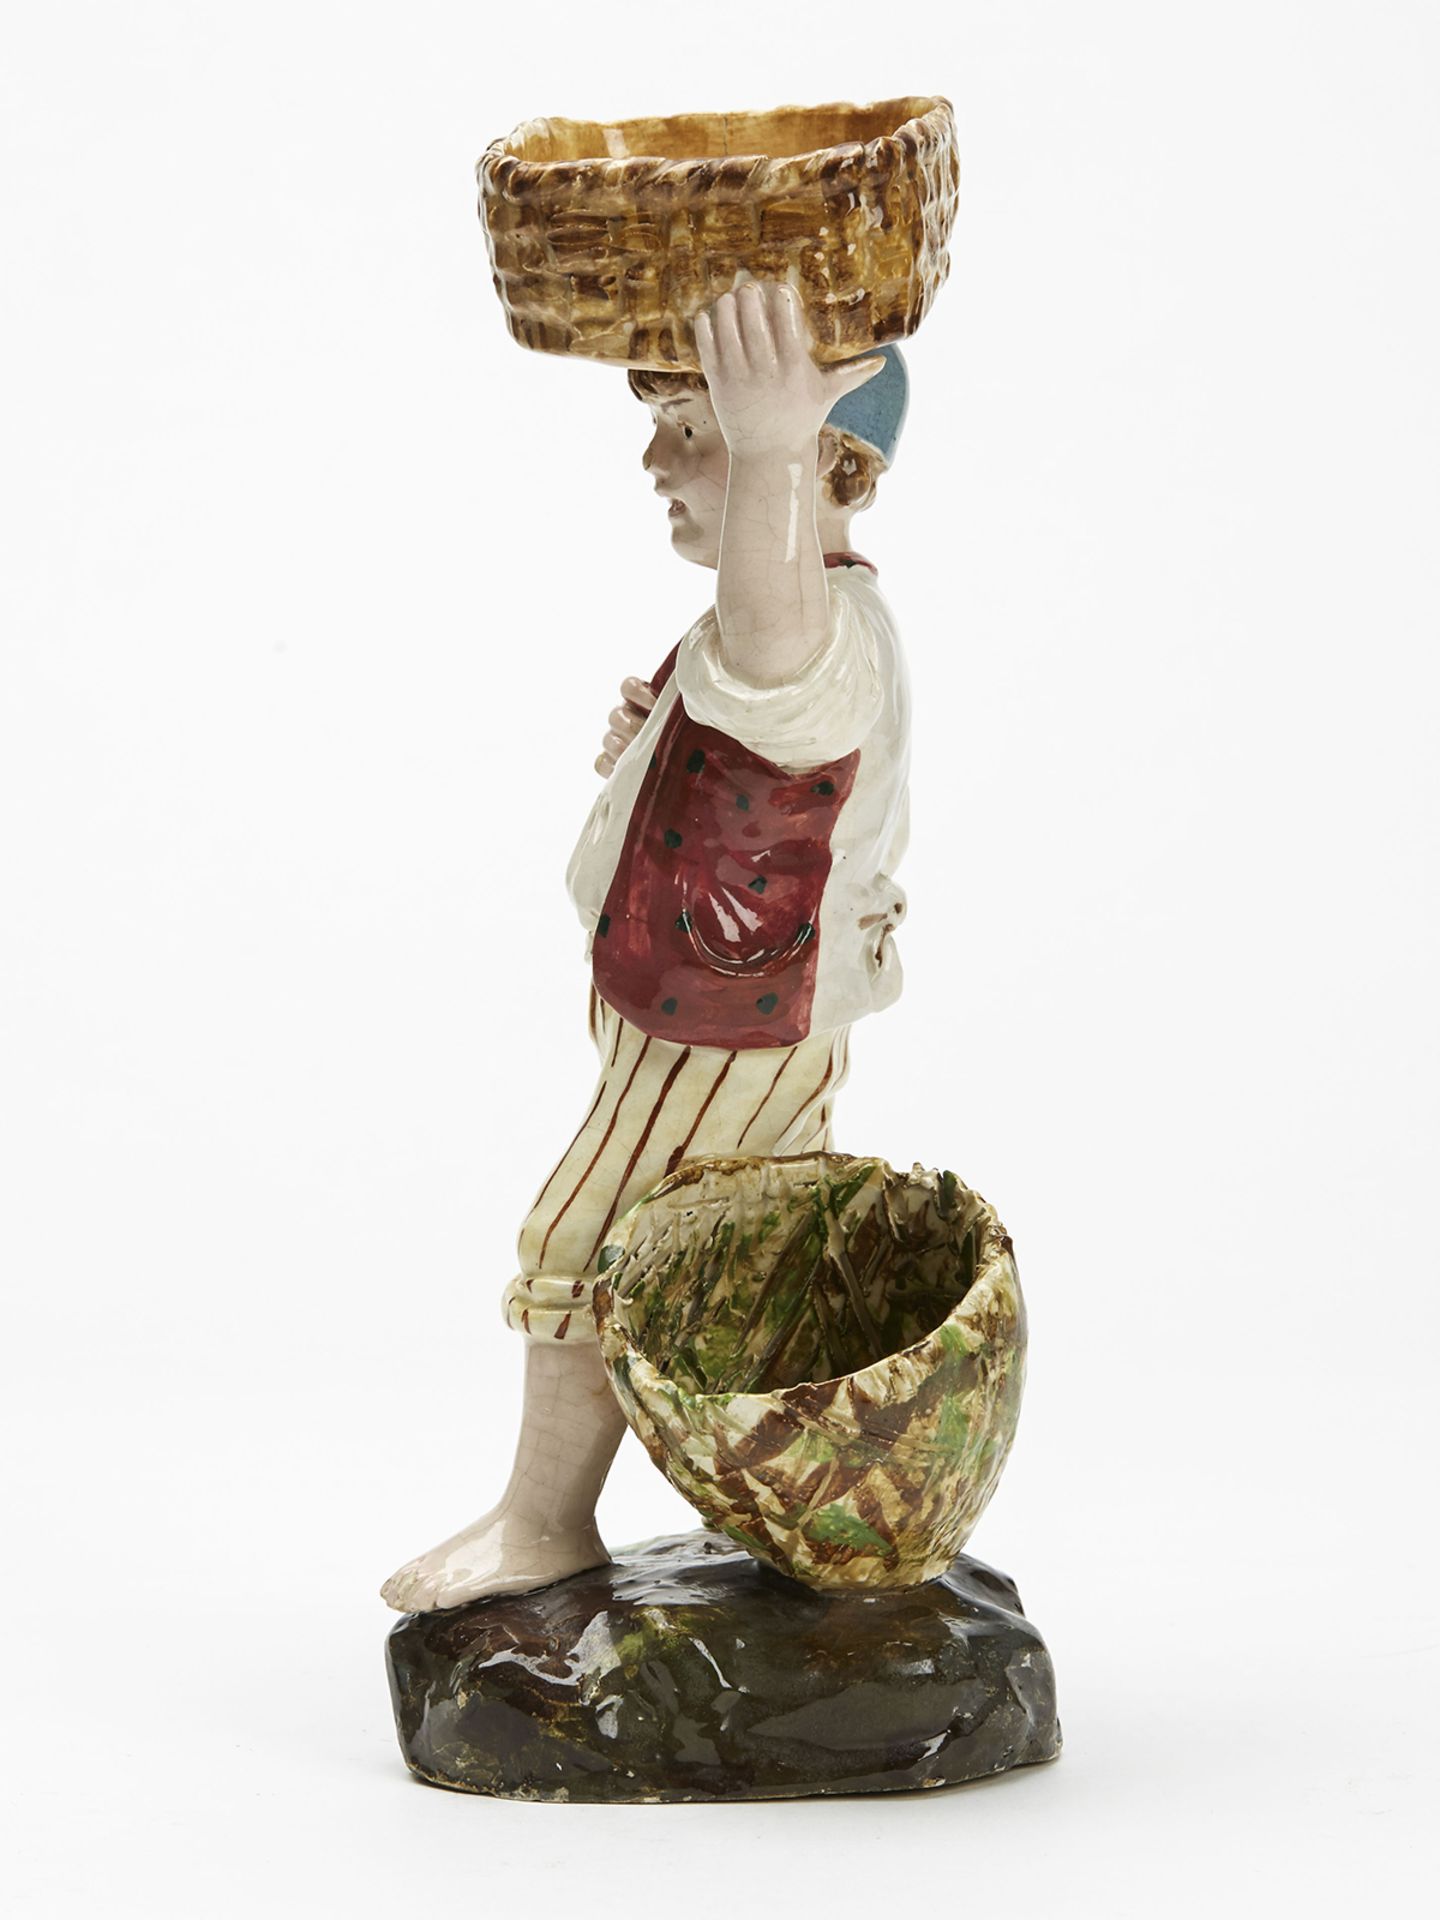 Antique Continental Pottery Boy & Baskets Figure 19Th C. - Image 4 of 8